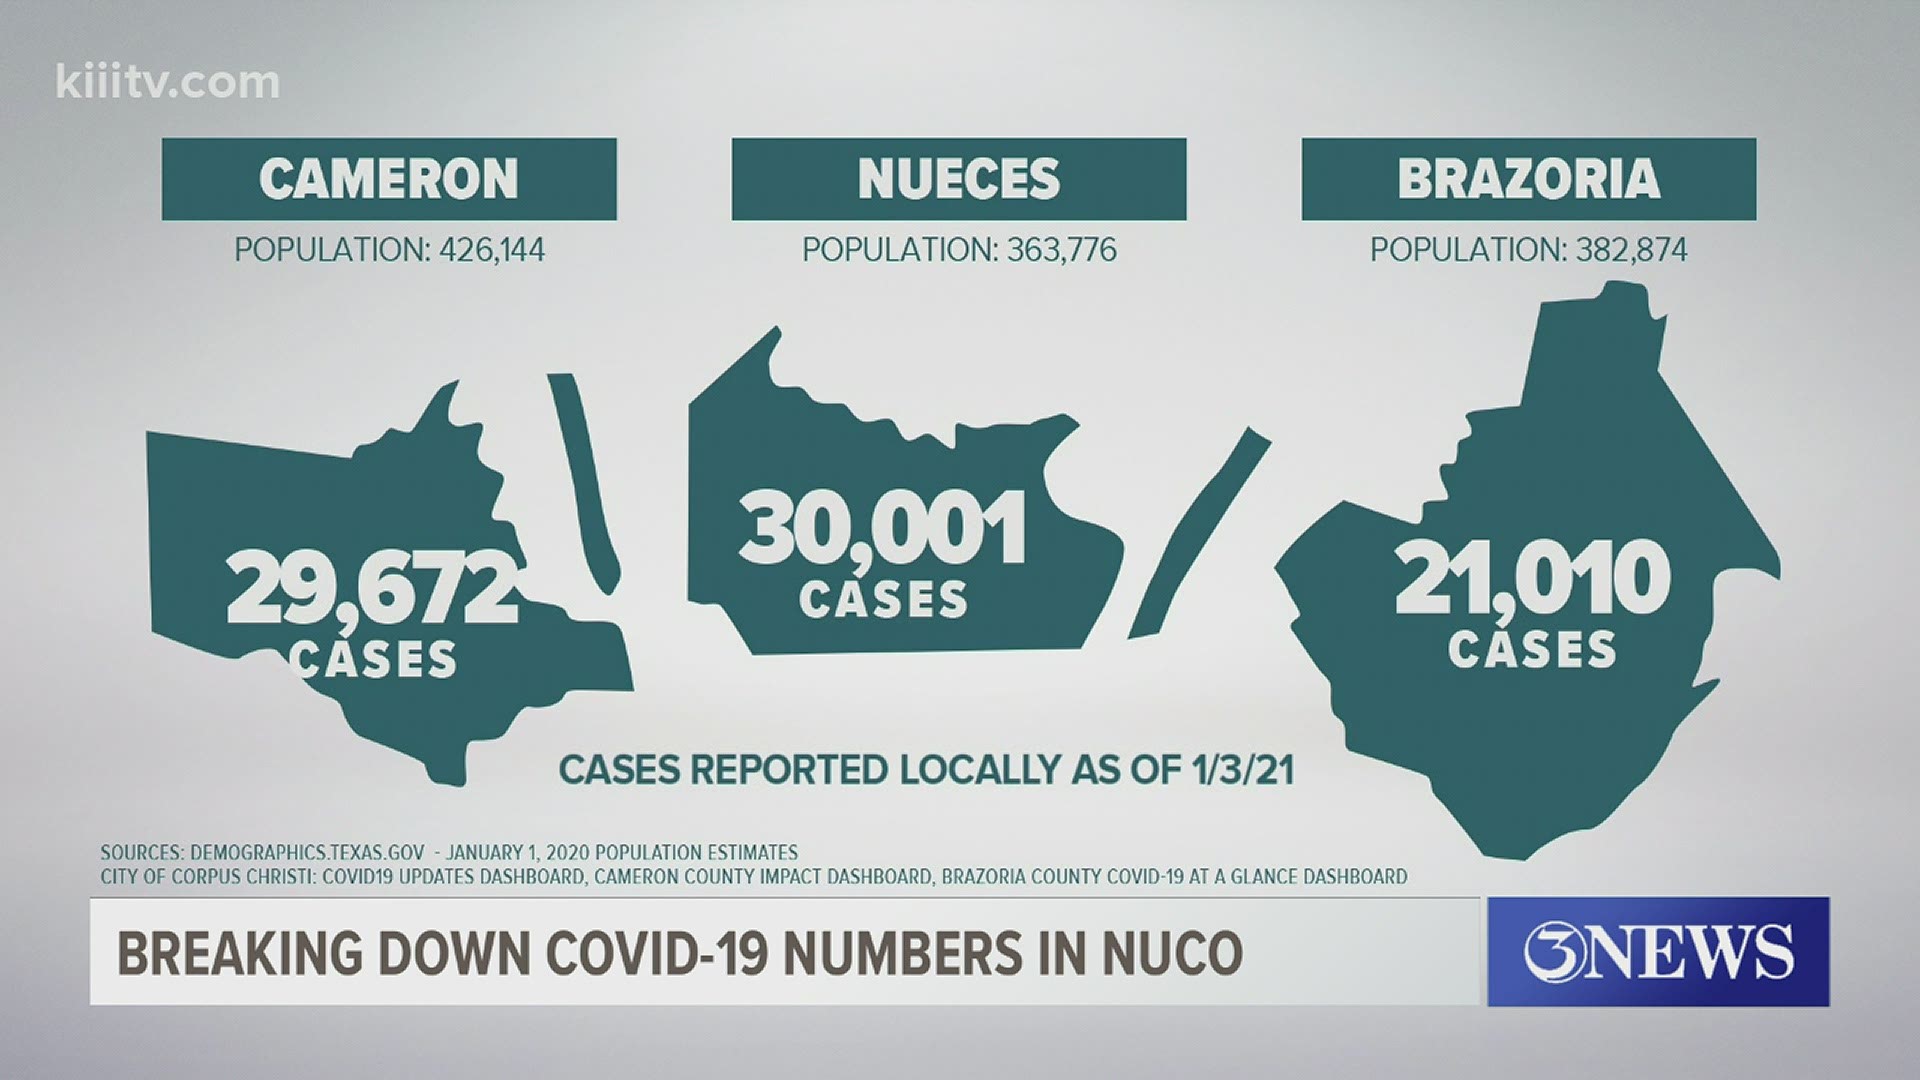 Nueces County was in a better position before the summer of 2020 with fewer COVID cases, which led to more people choosing to visit here.